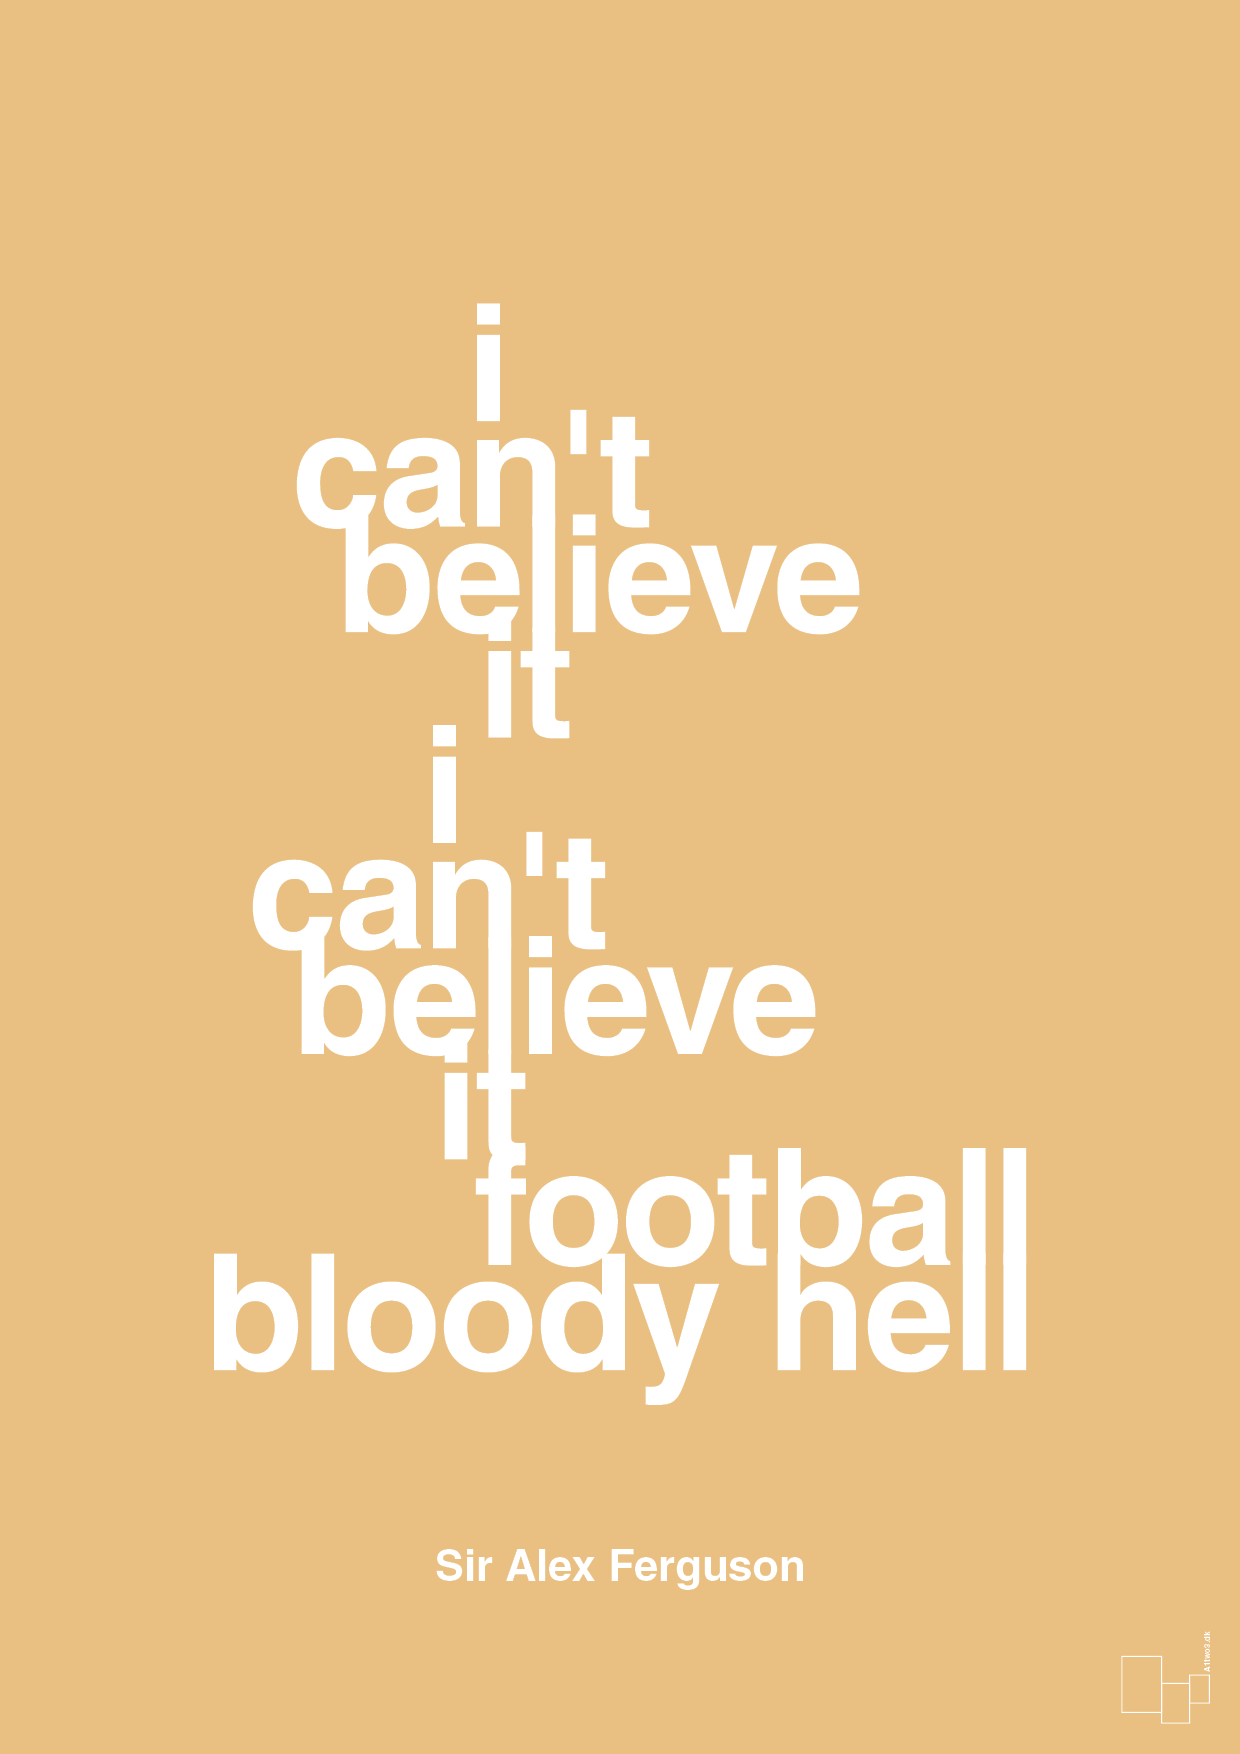 i can't believe it i can't believe it football bloody hell - Plakat med Citater i Charismatic